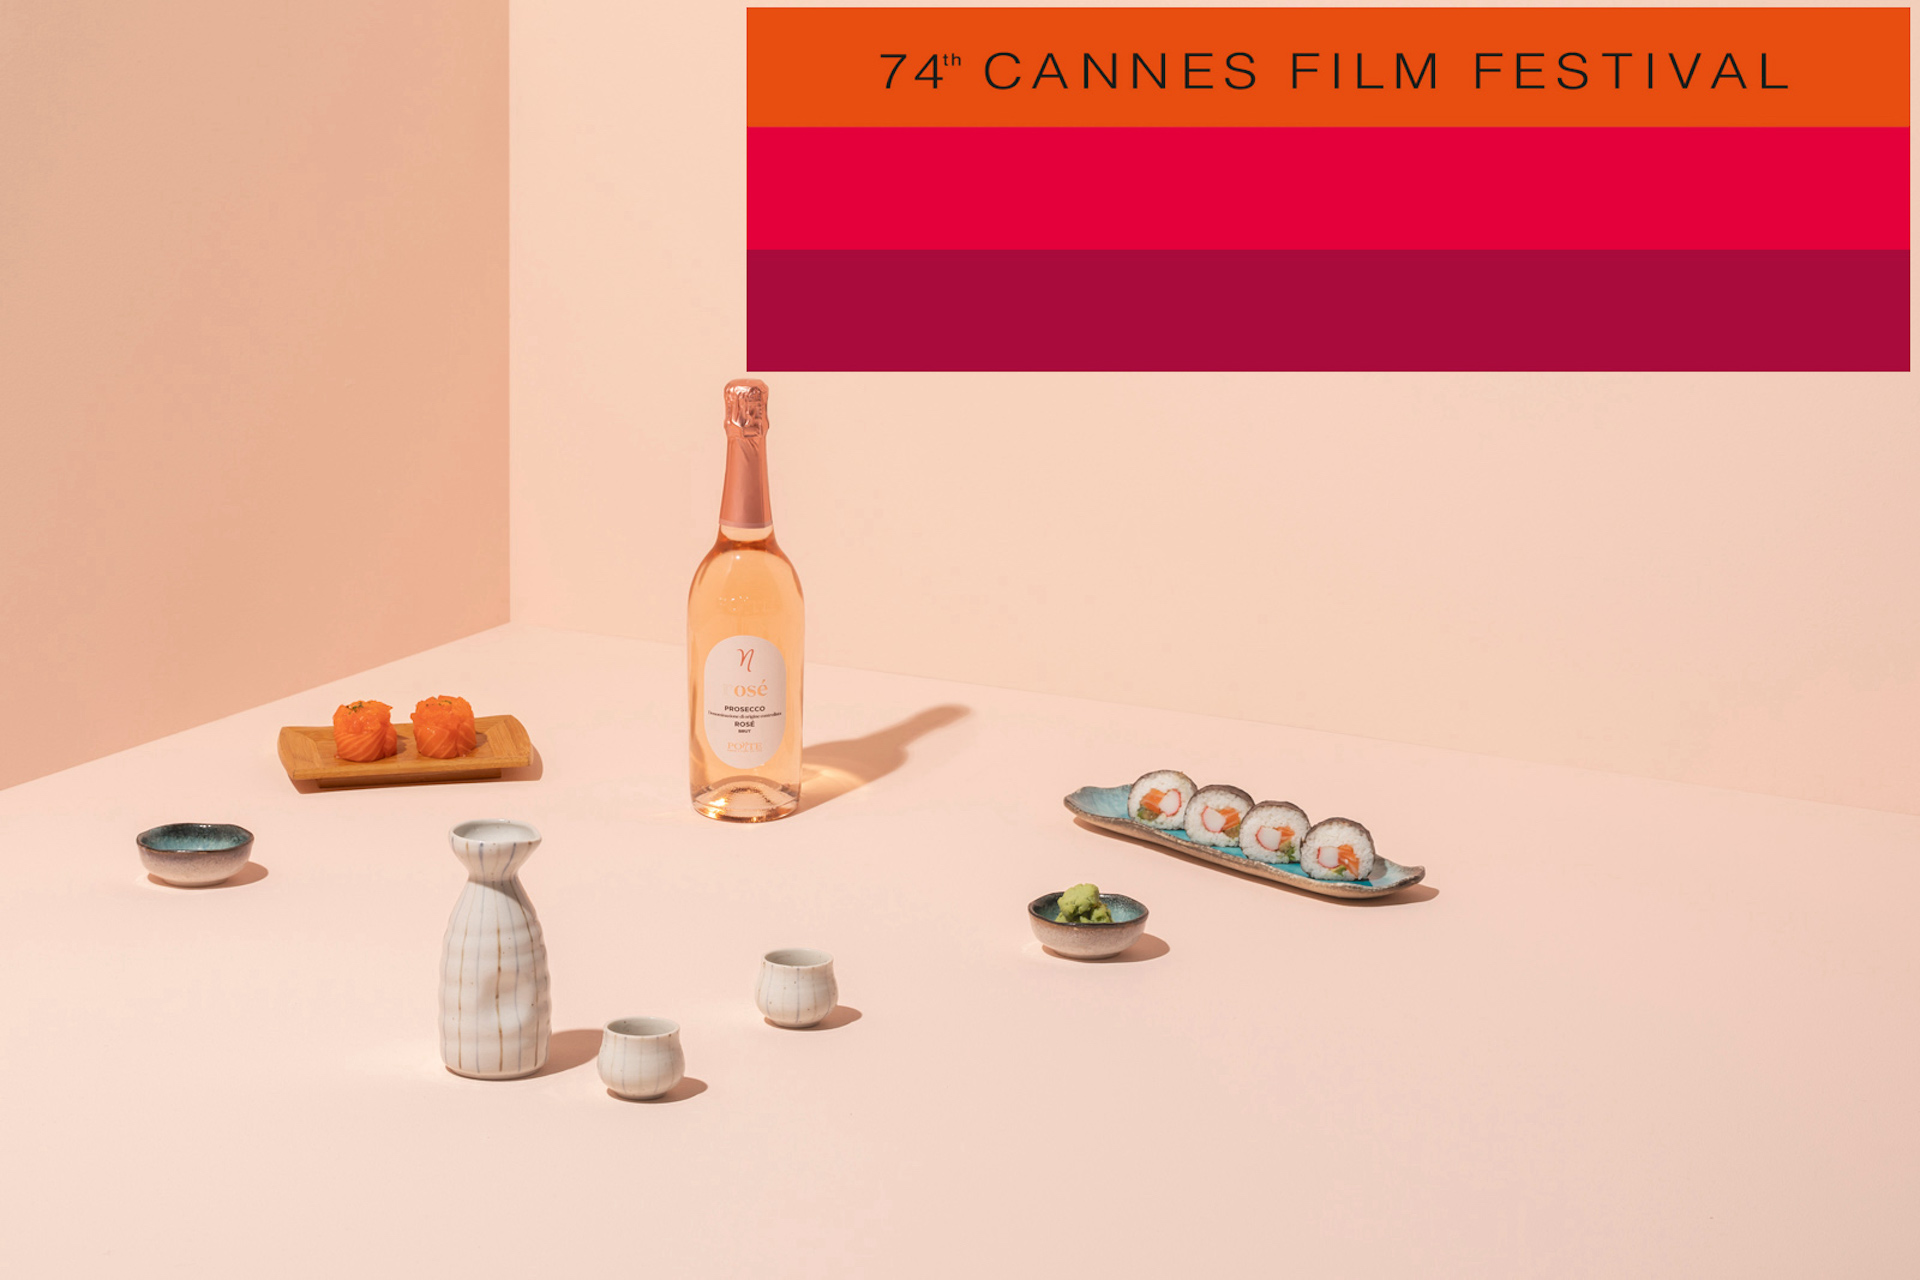 PROSECCO DOC TREVISO, ROSÉ AND THE CHOOSE COCKTAILS AT THE 74TH CANNES FILM FESTIVAL